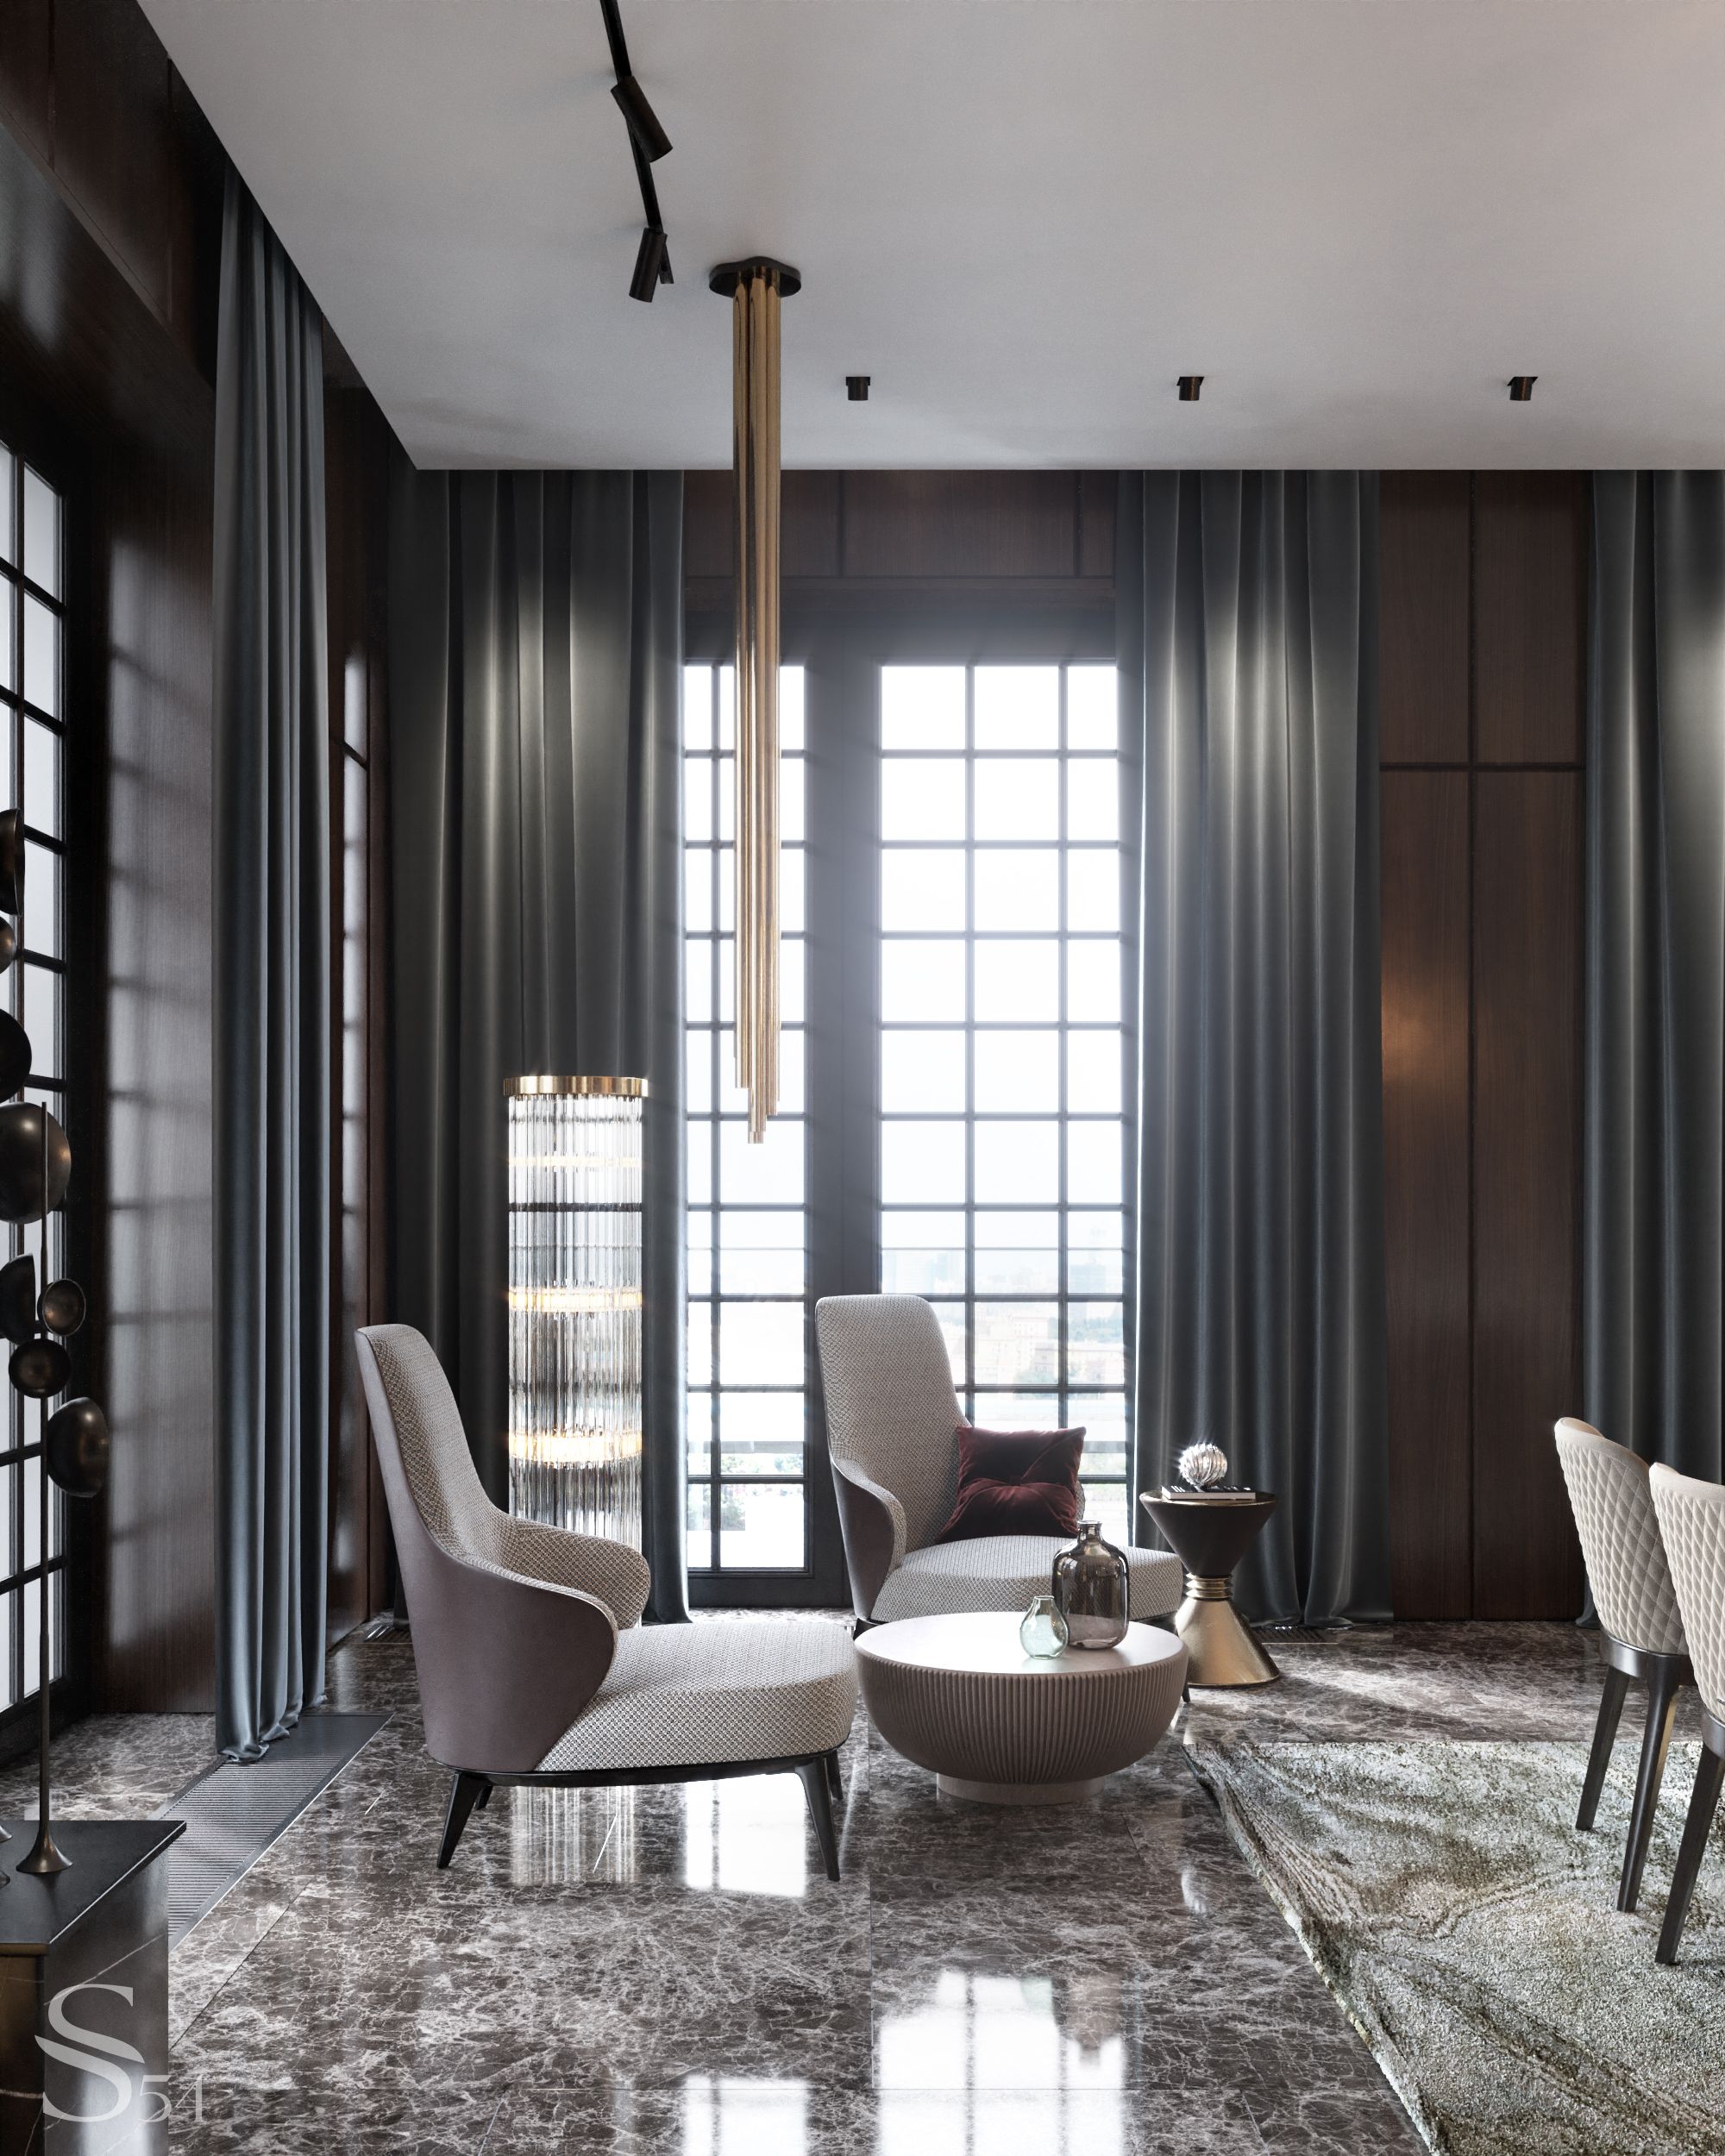 Armchairs Minotti, table Baxter in the dining room interior